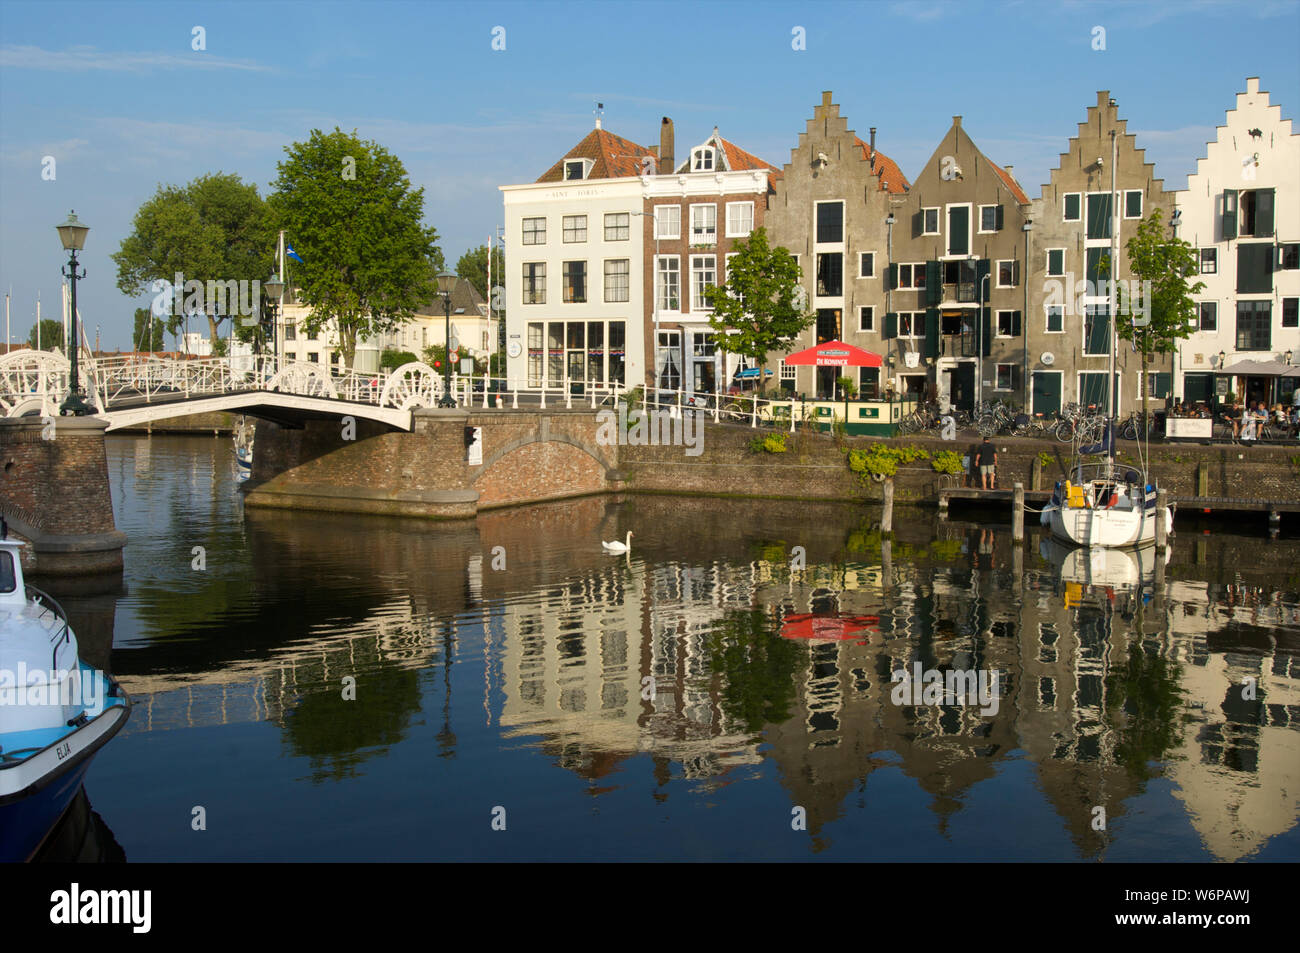 The Kinderdijk and the Spijker Bridge with historic buildings in the city of Middelburg, the Netherlands Stock Photo